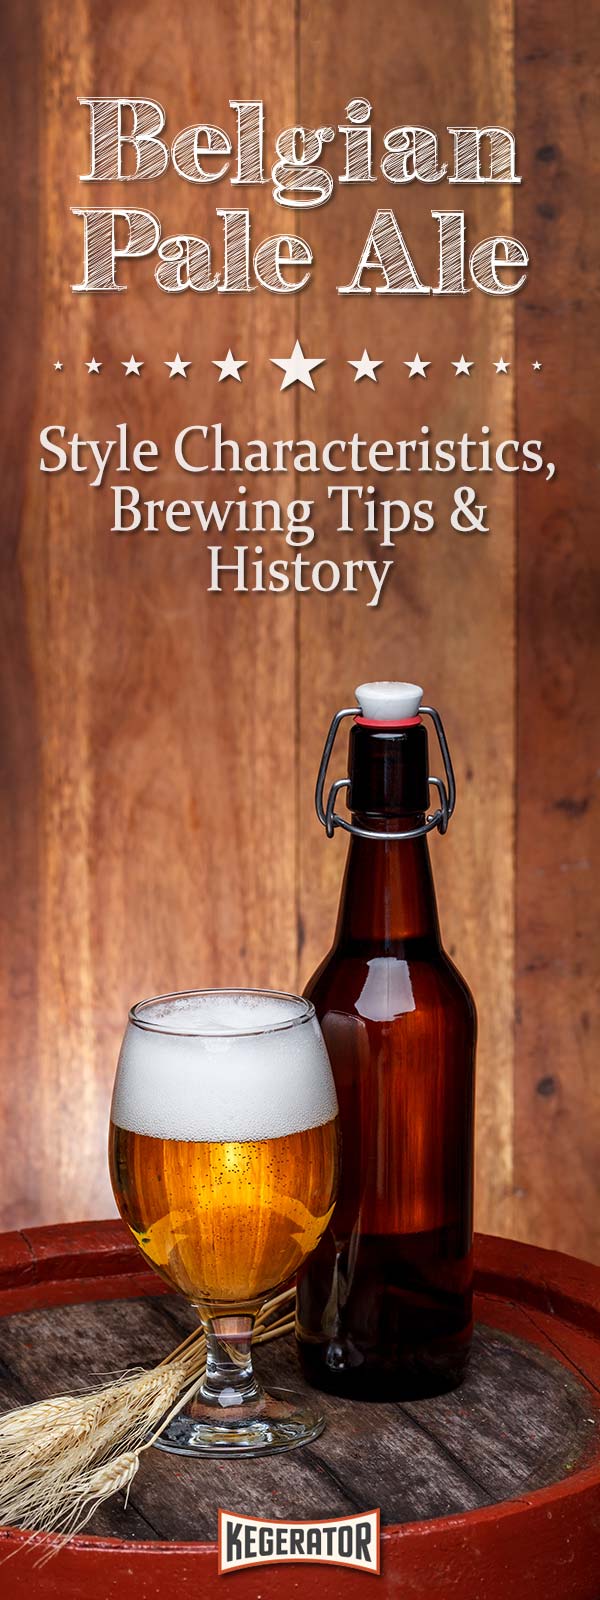 Belgian Pale Ale - Style Characteristics, Brewing Tips & History